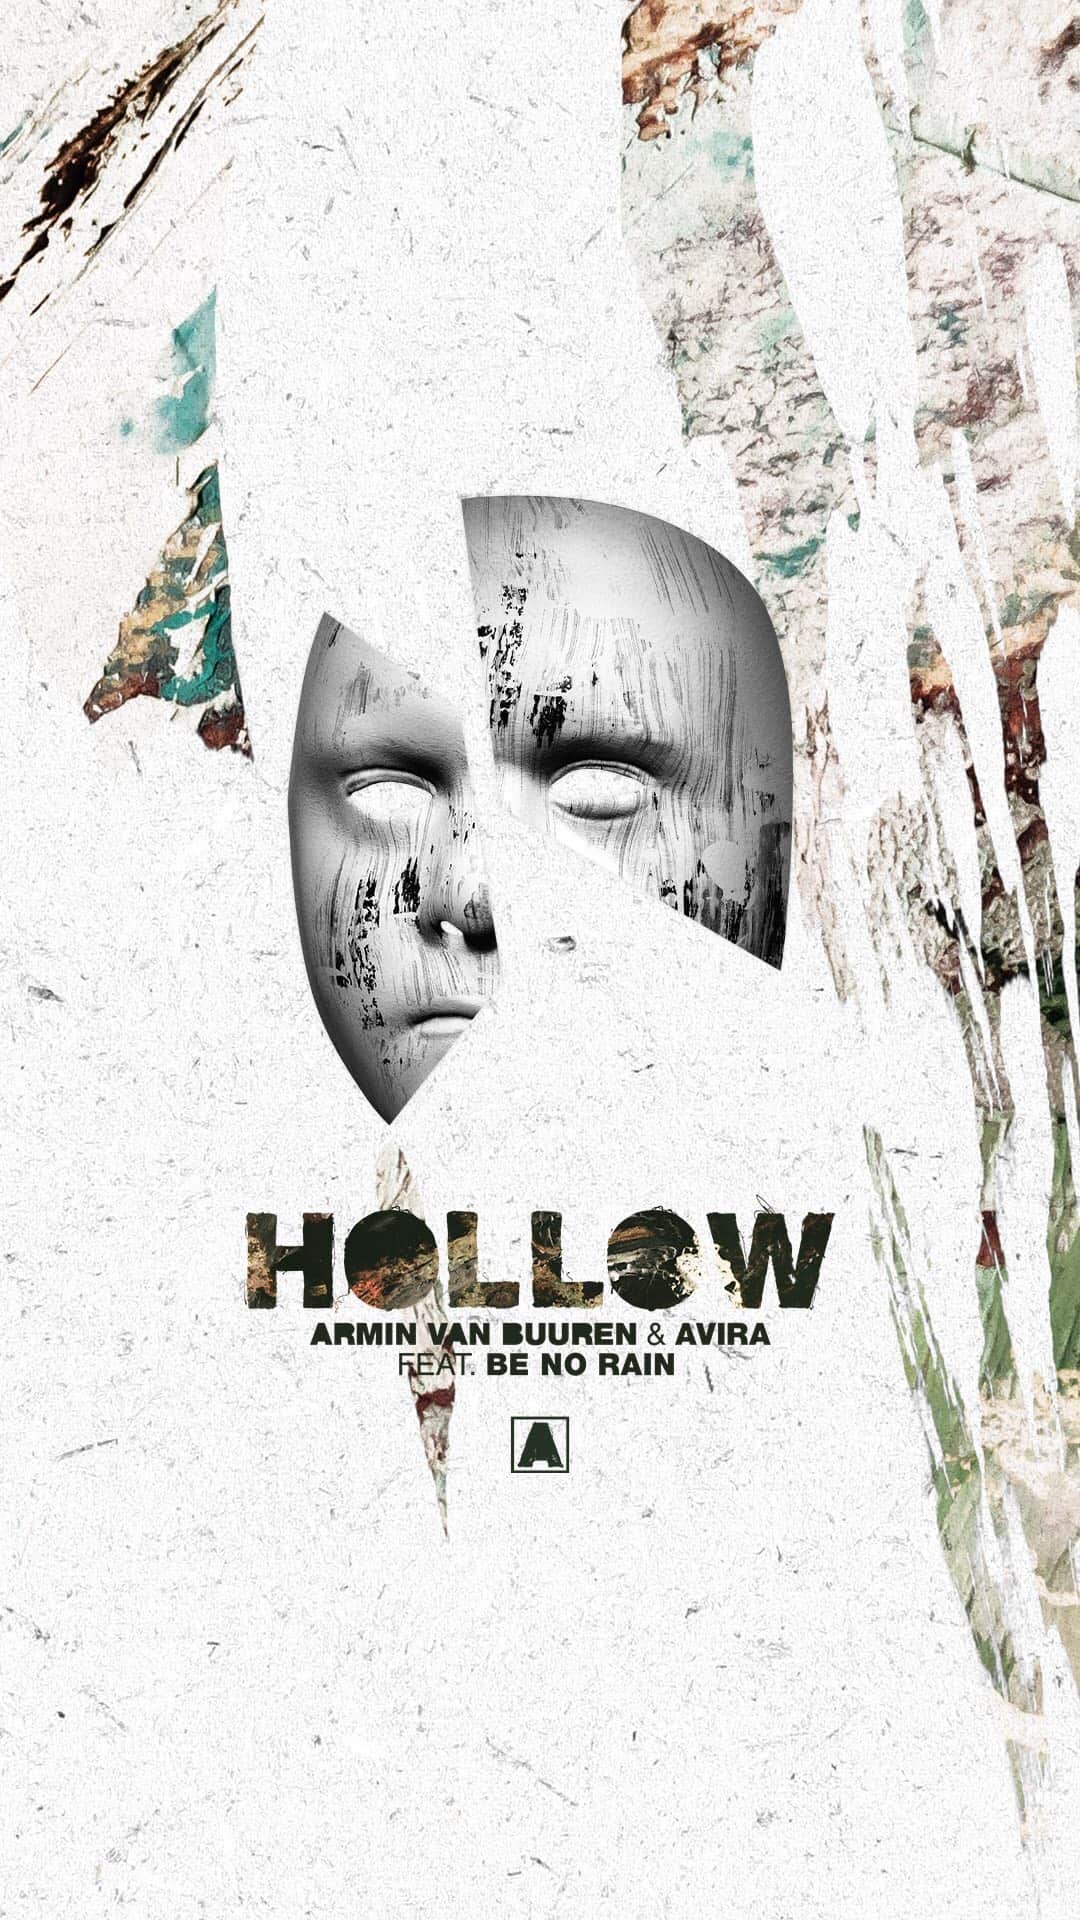 Armin Van Buurenのインスタグラム：「After teasing this one for weeks, I'm beyond excited to announce that my collab with AVIRA called 'Hollow' feat. Be No Rain is out today! Check it out via the #linkinbio」